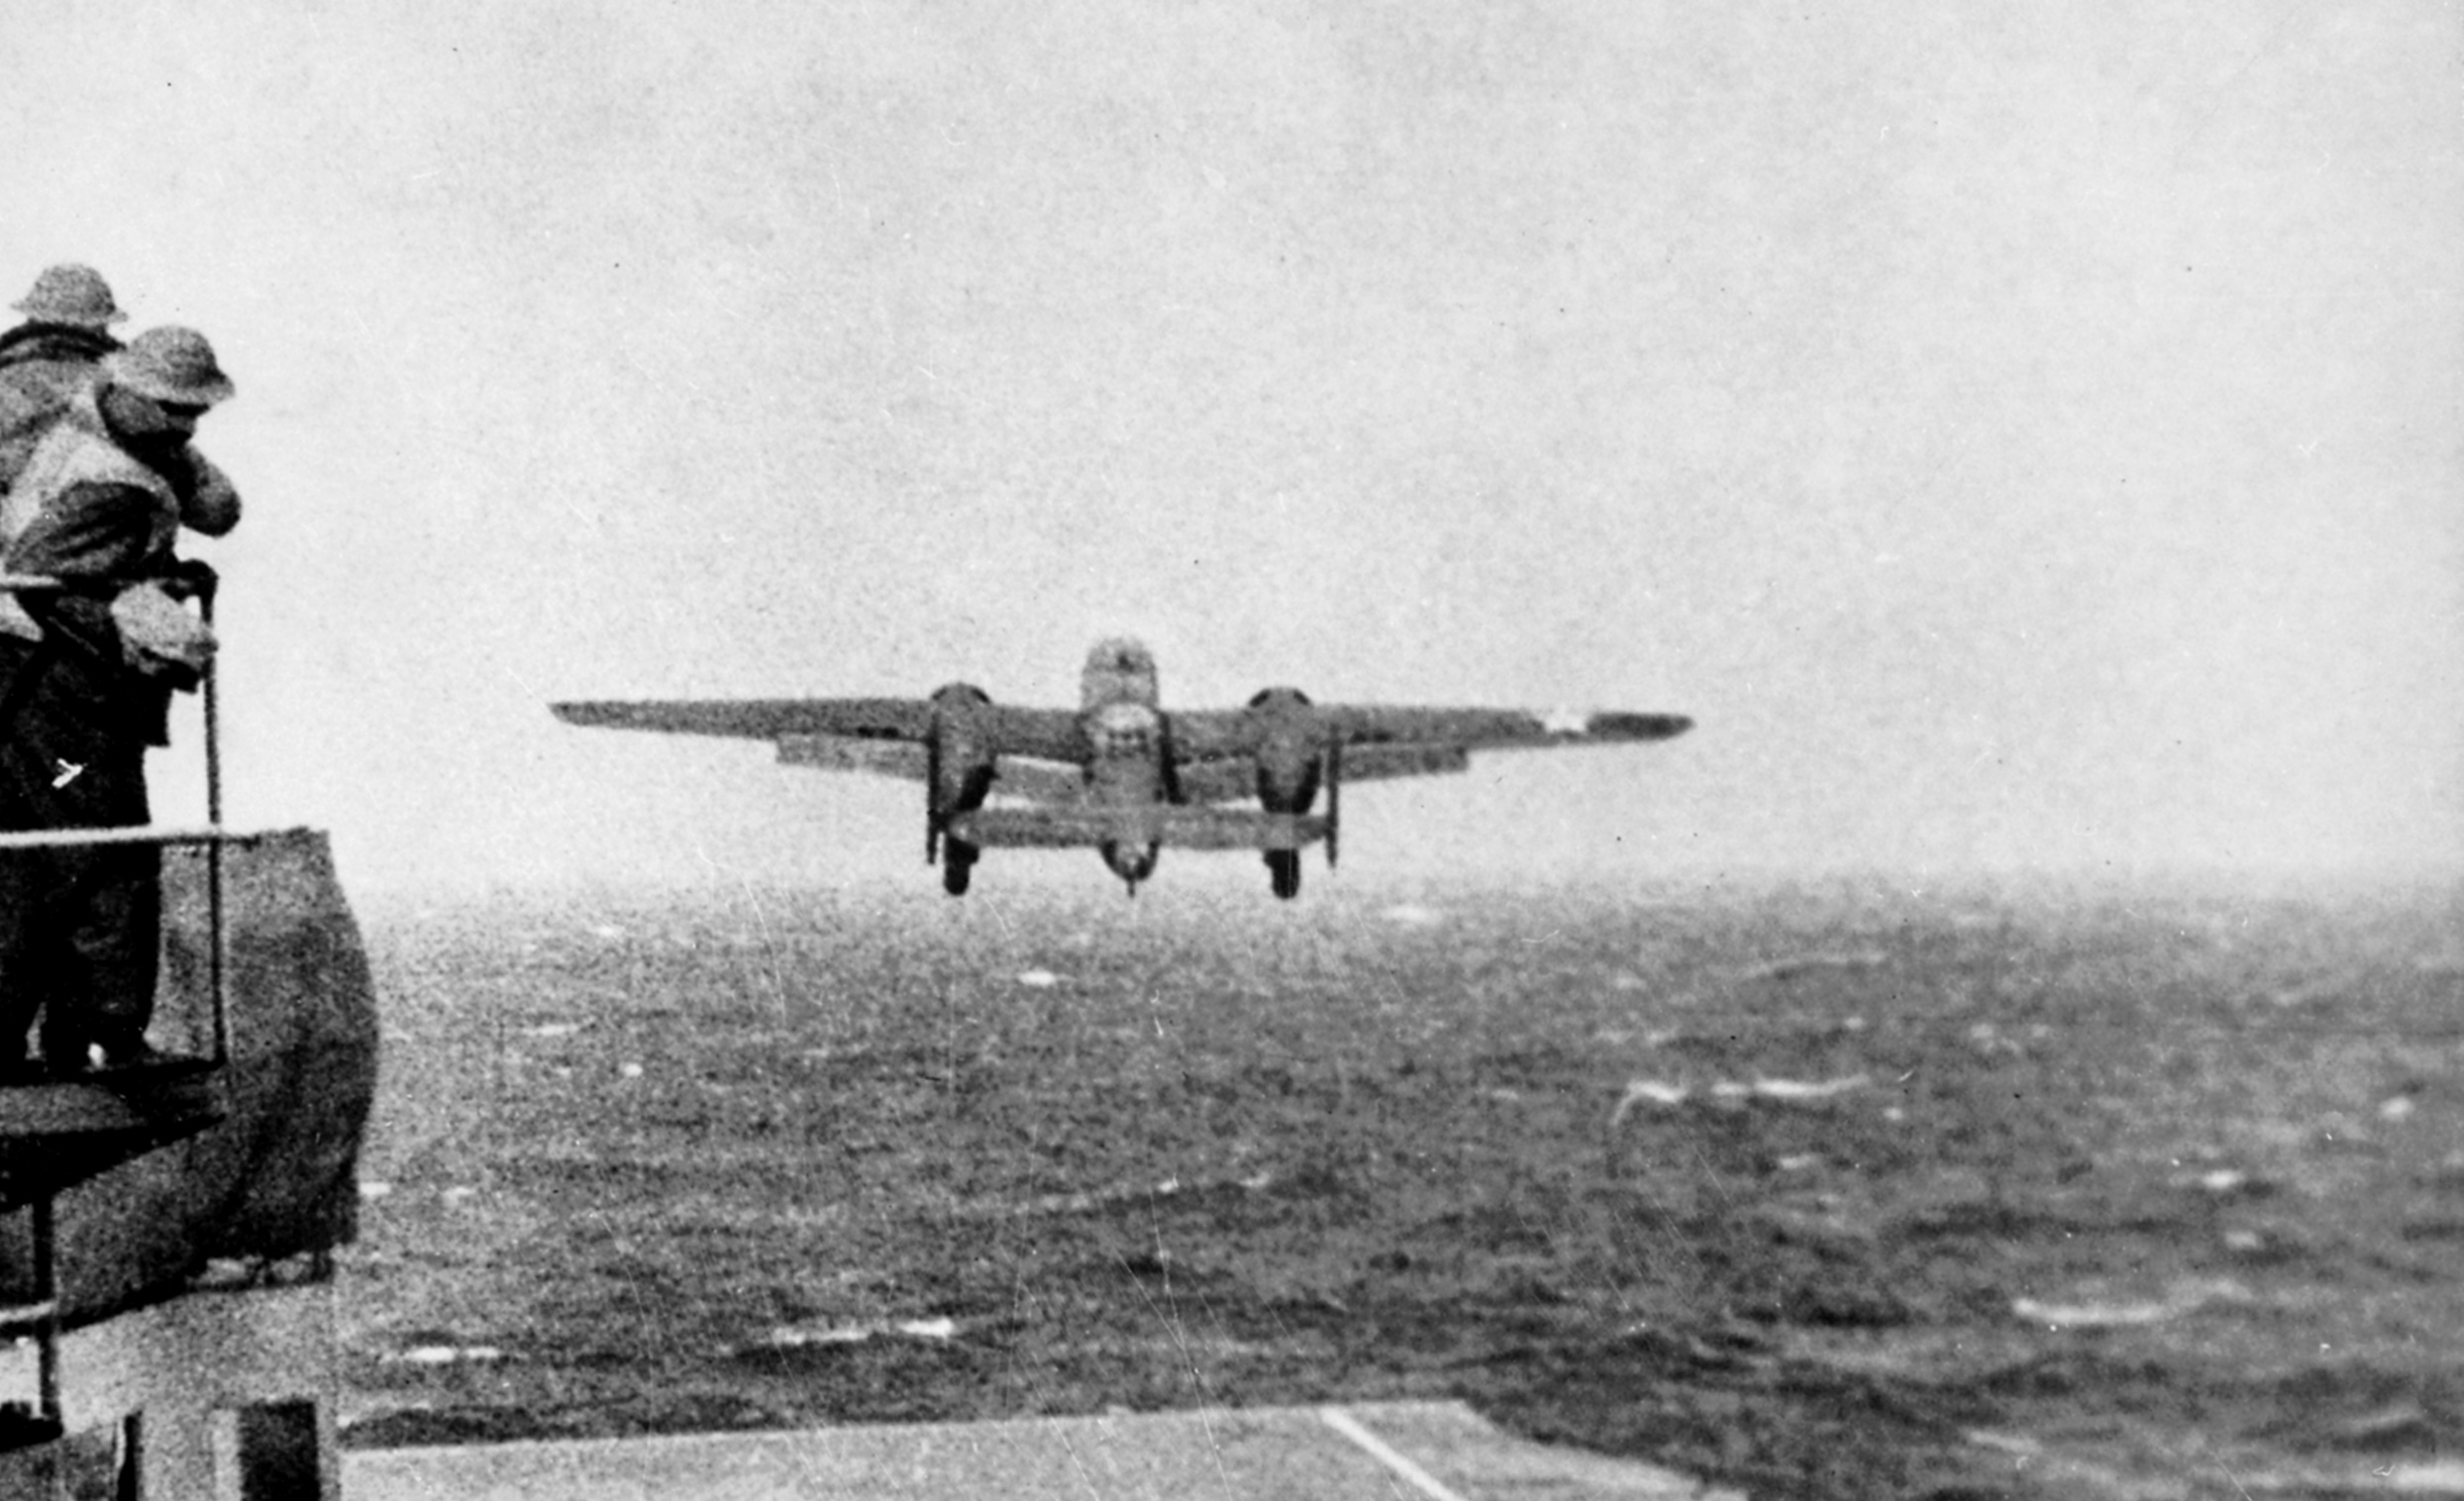 Just 30 Seconds Over Tokyo: How the Doolittle Raid Doomed the Japanese